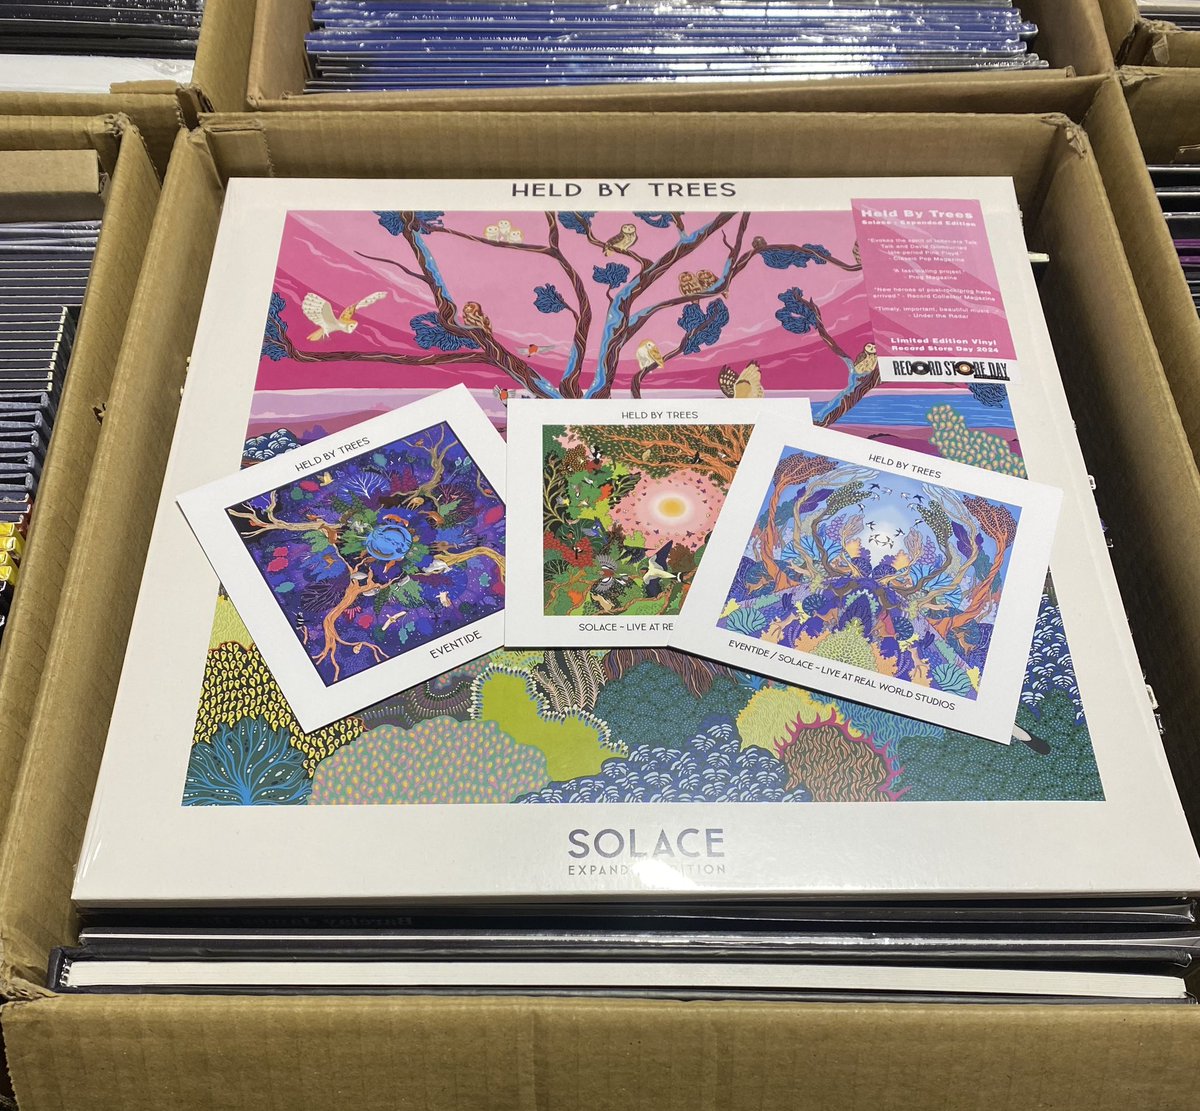 1/2 hour to go…and a last minute surprise gift from from our friends @heldbytrees who have ‘solace - expanded edition’ on double vinyl released for this year’s @RSDUK A set of beautiful art cards to go along with the original stunningly beautiful debut LP with bonus disc #rsd